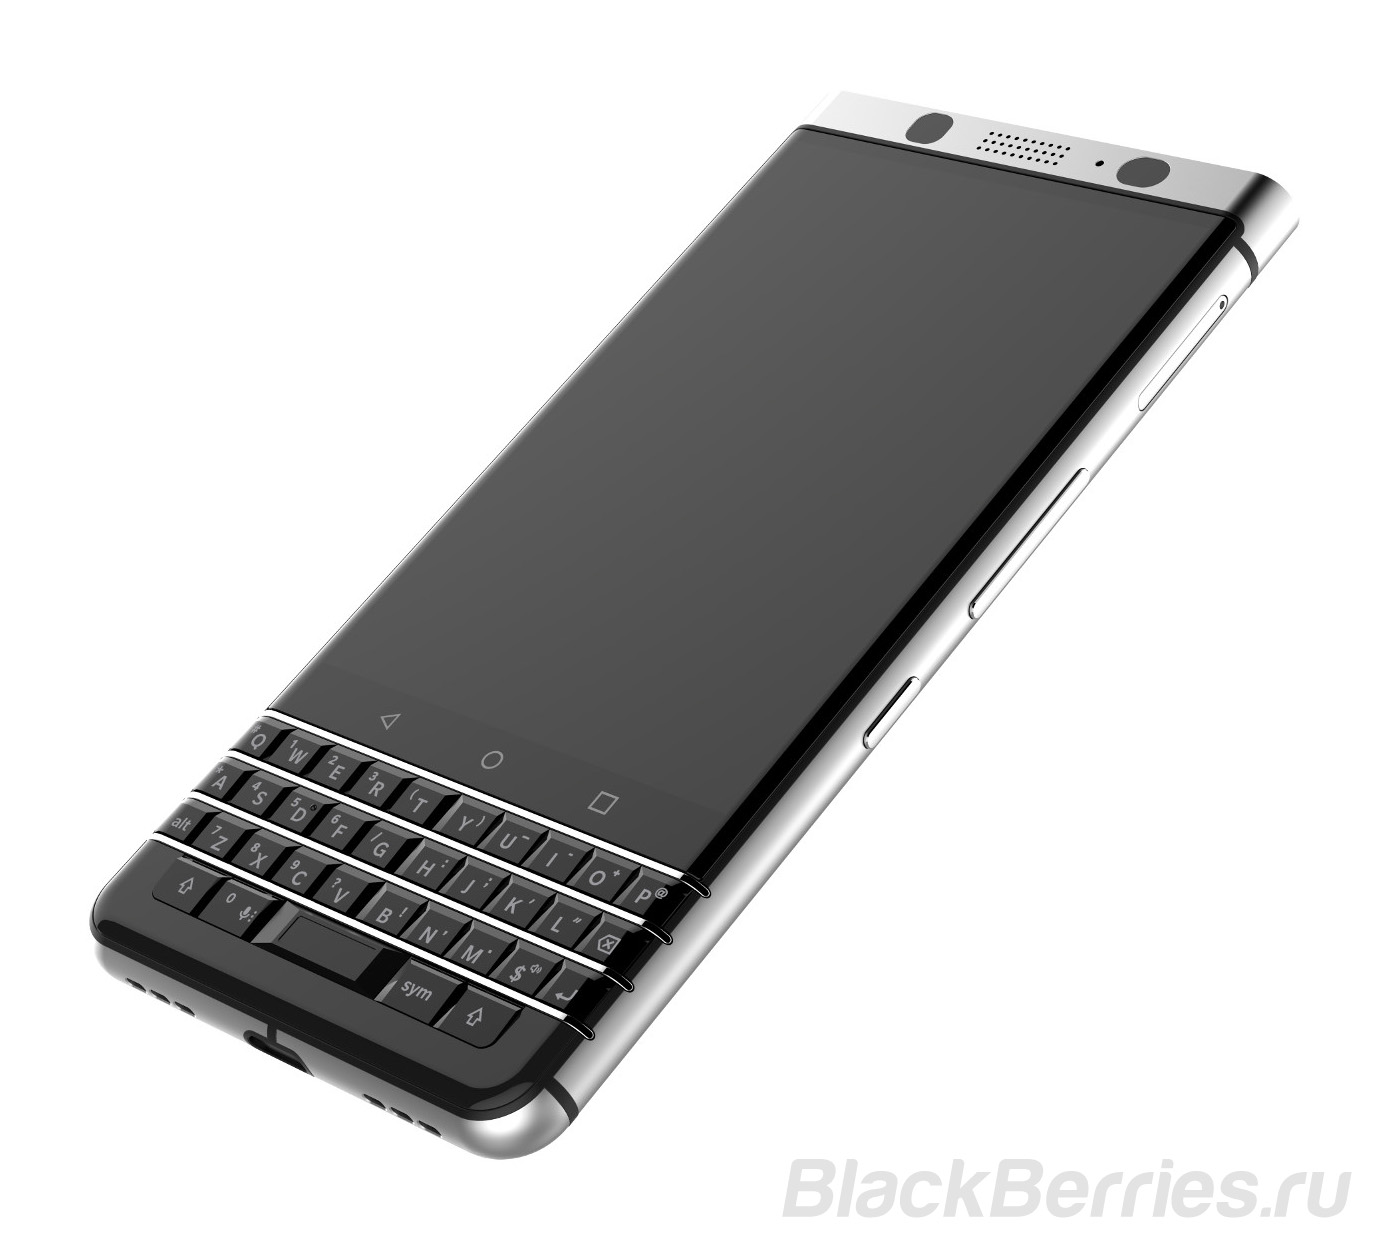 New-BlackBerry-Smartphone_Front-side